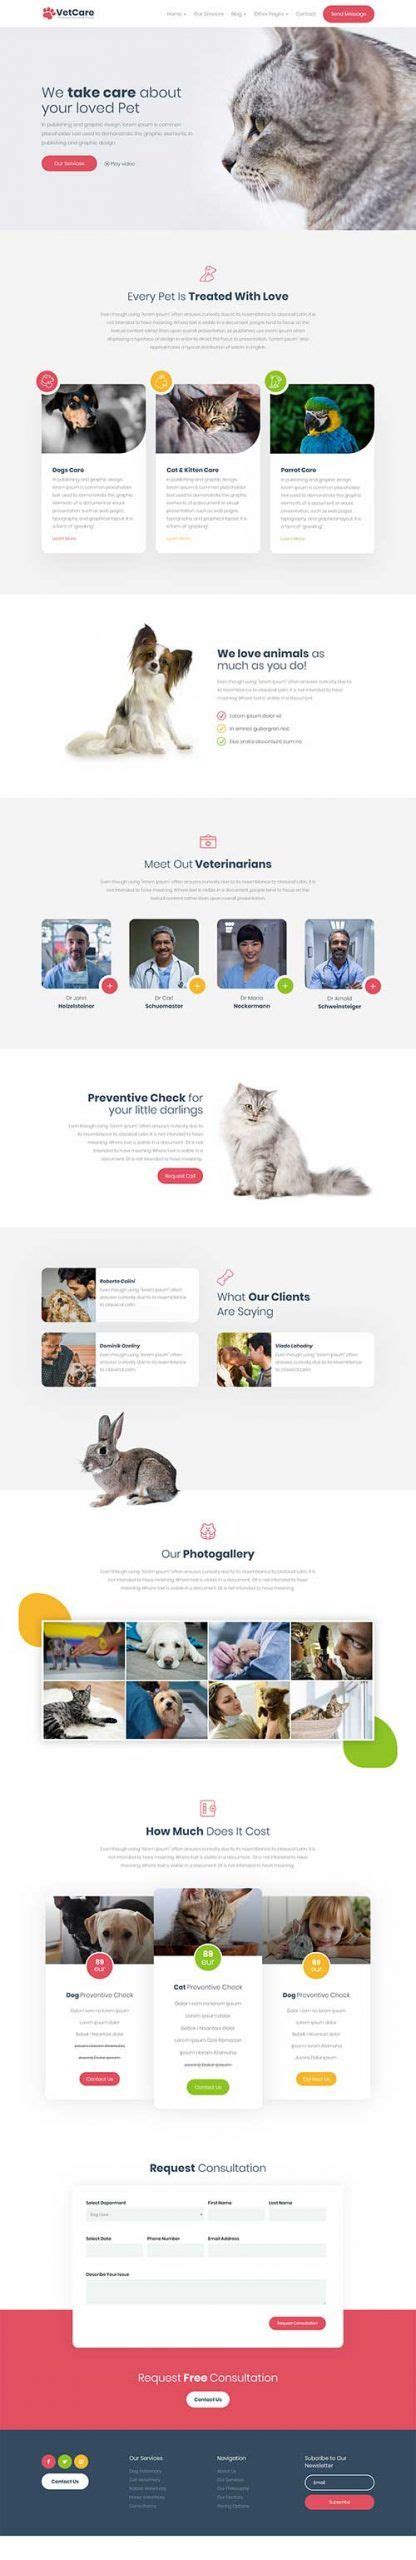 Low cost spay & neuter. Vet Care | Custom icons, Pet clinic, Vets